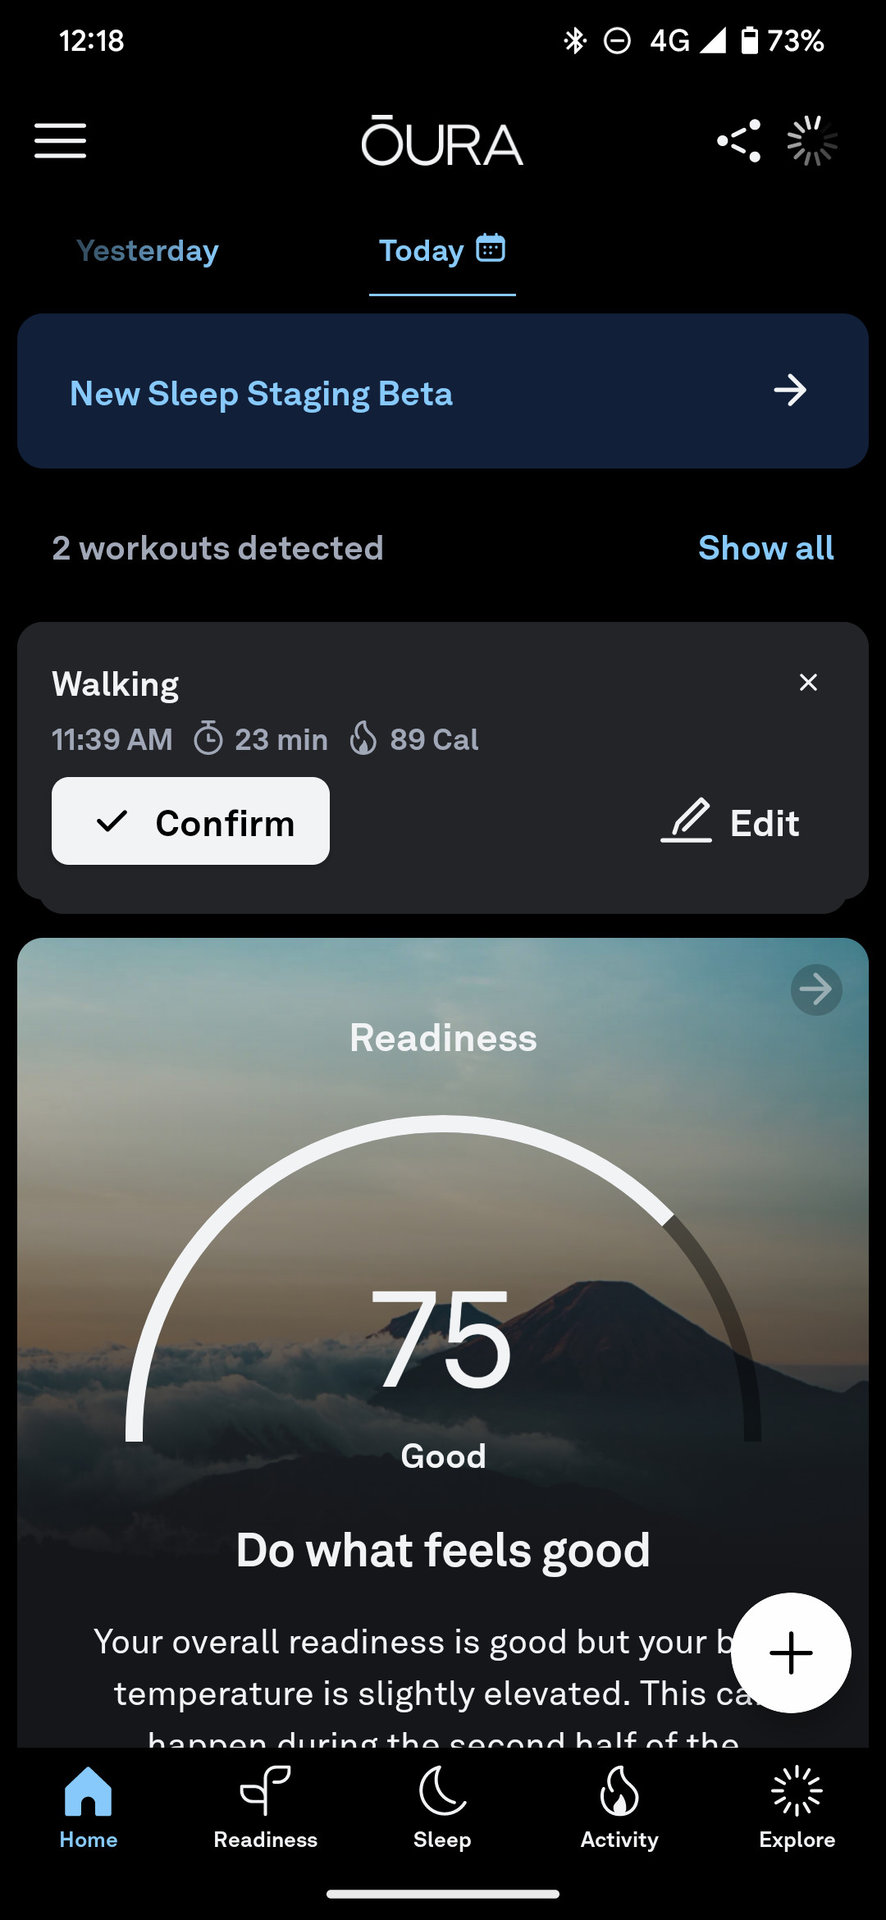 oura app workout detection 1